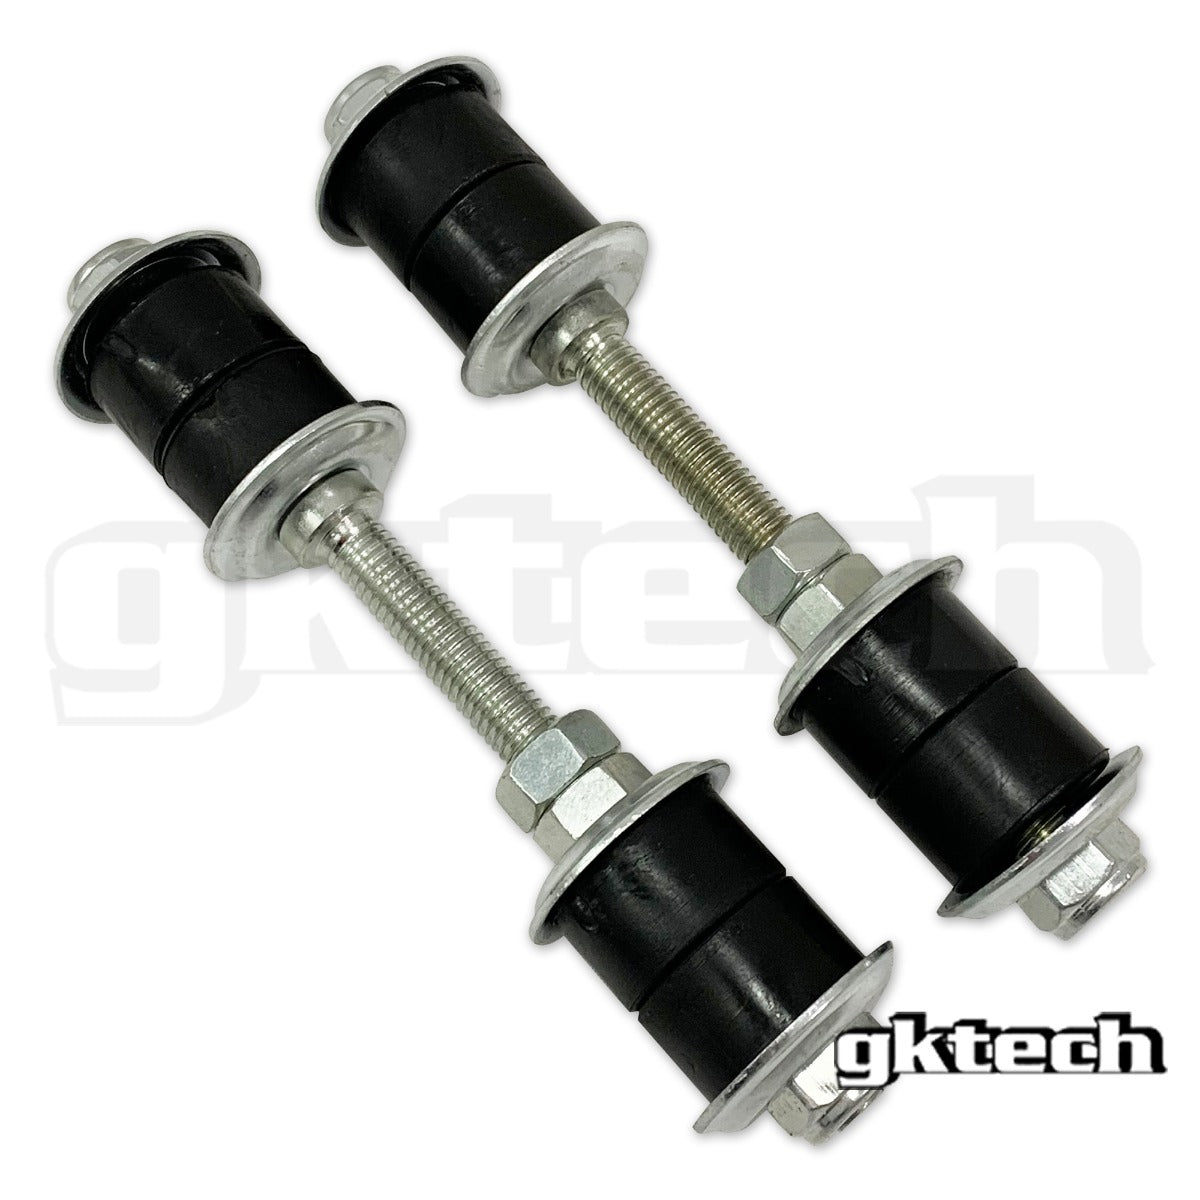 S/R chassis rear Swaybar end links